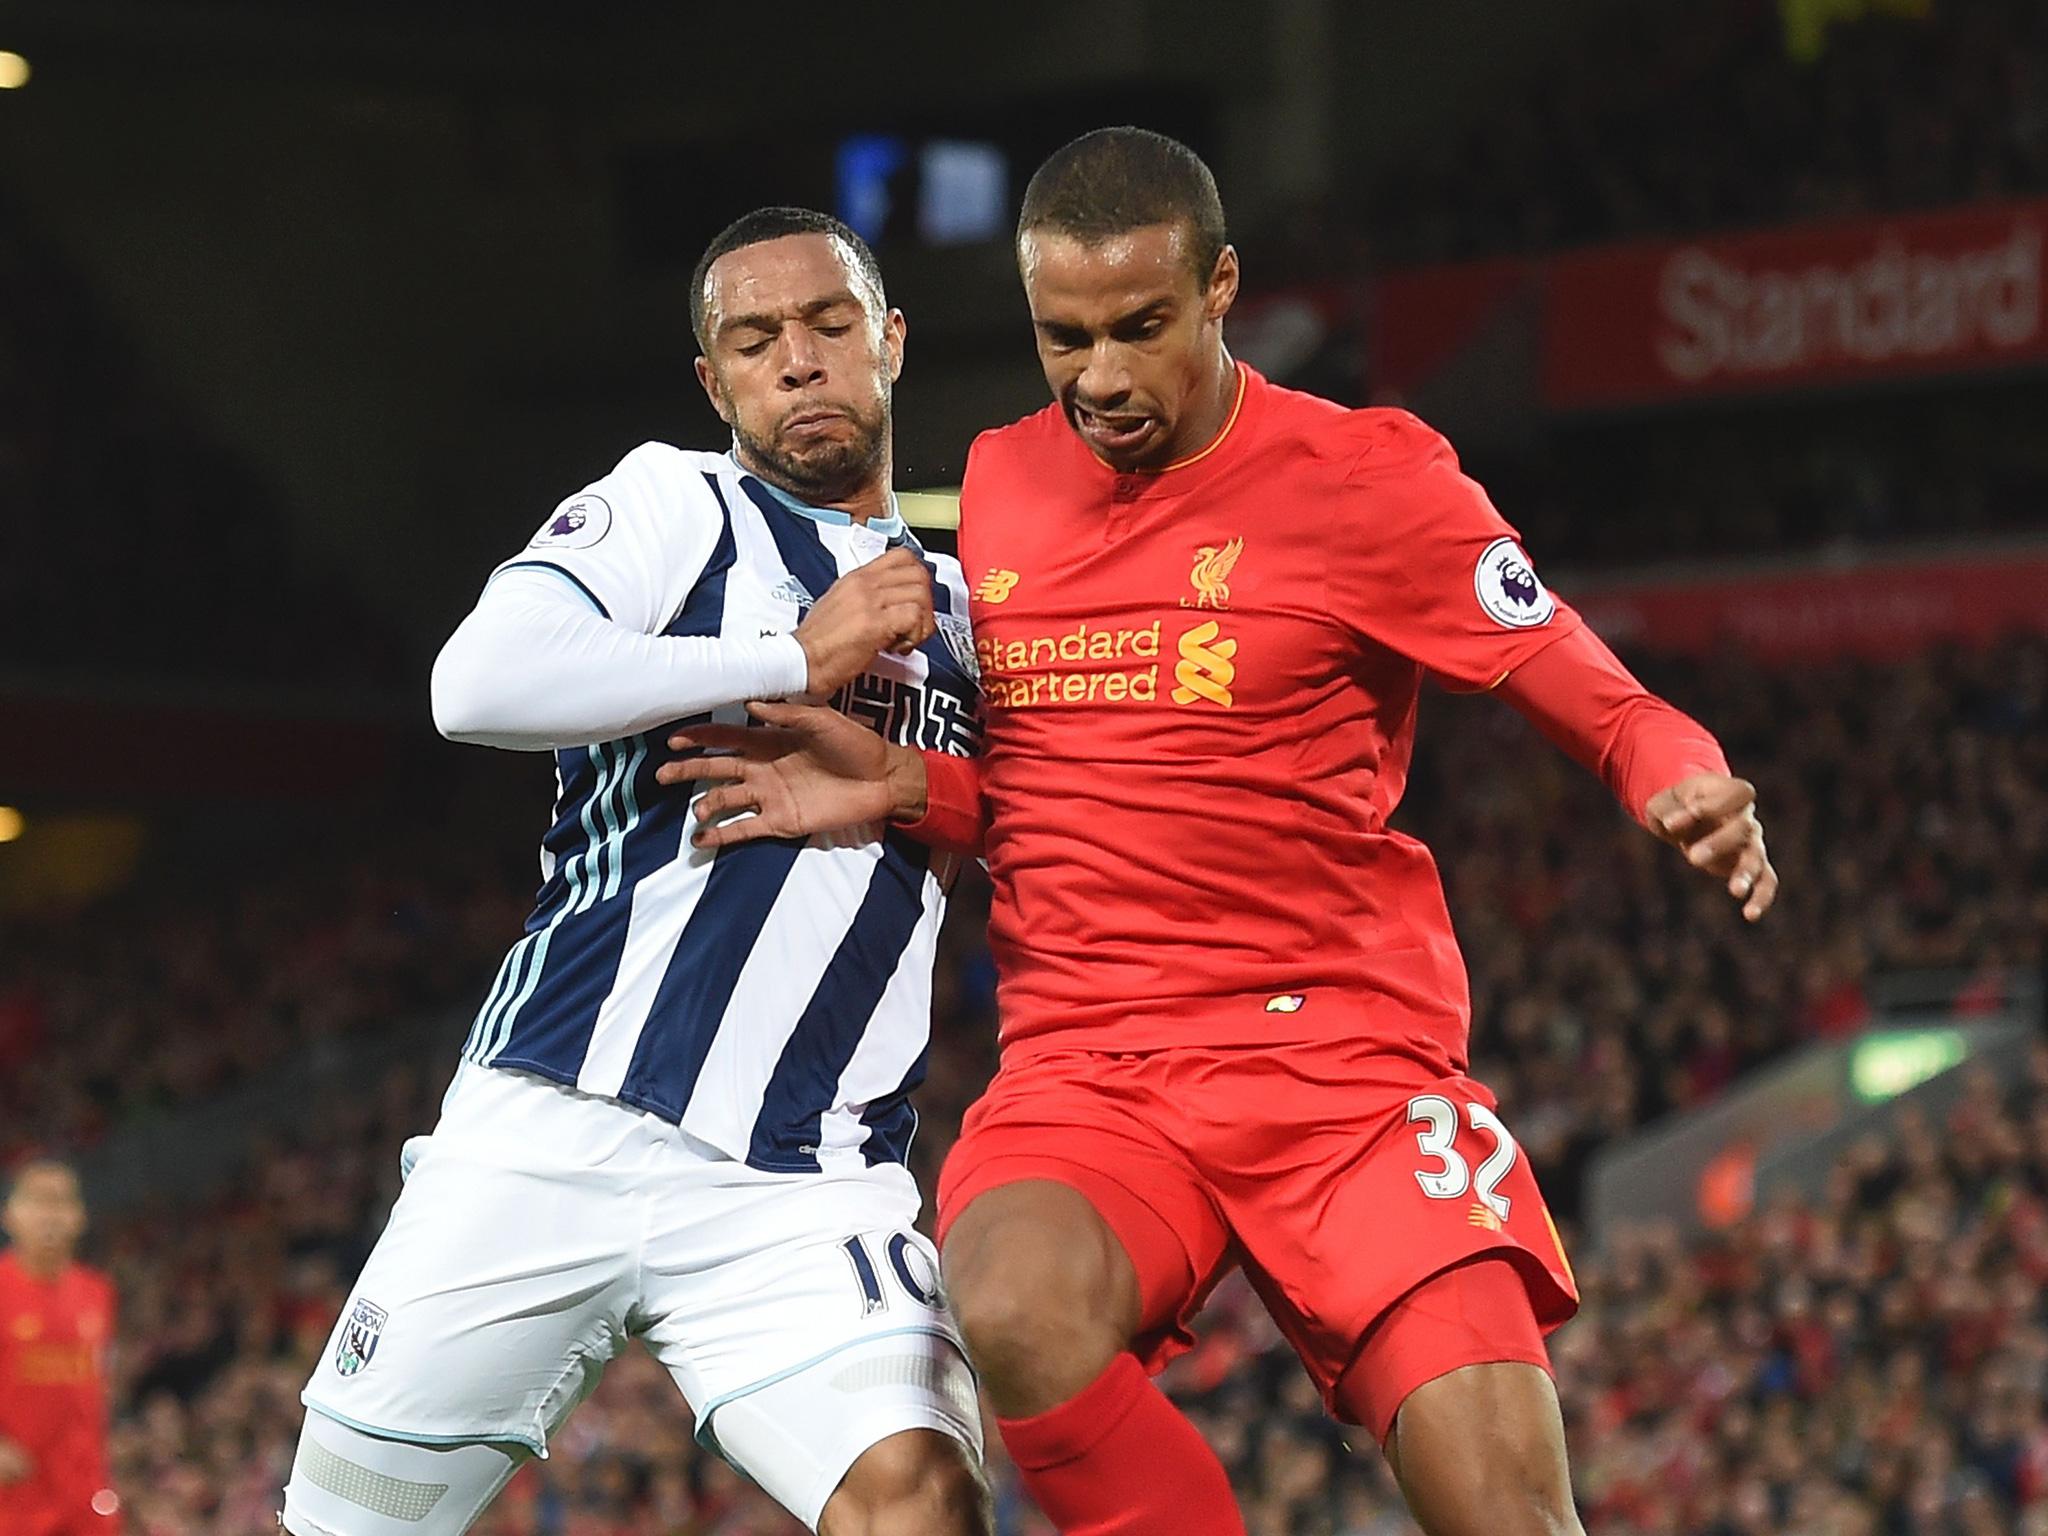 Joel Matip is currently out indefinitely because of a row over eligibility